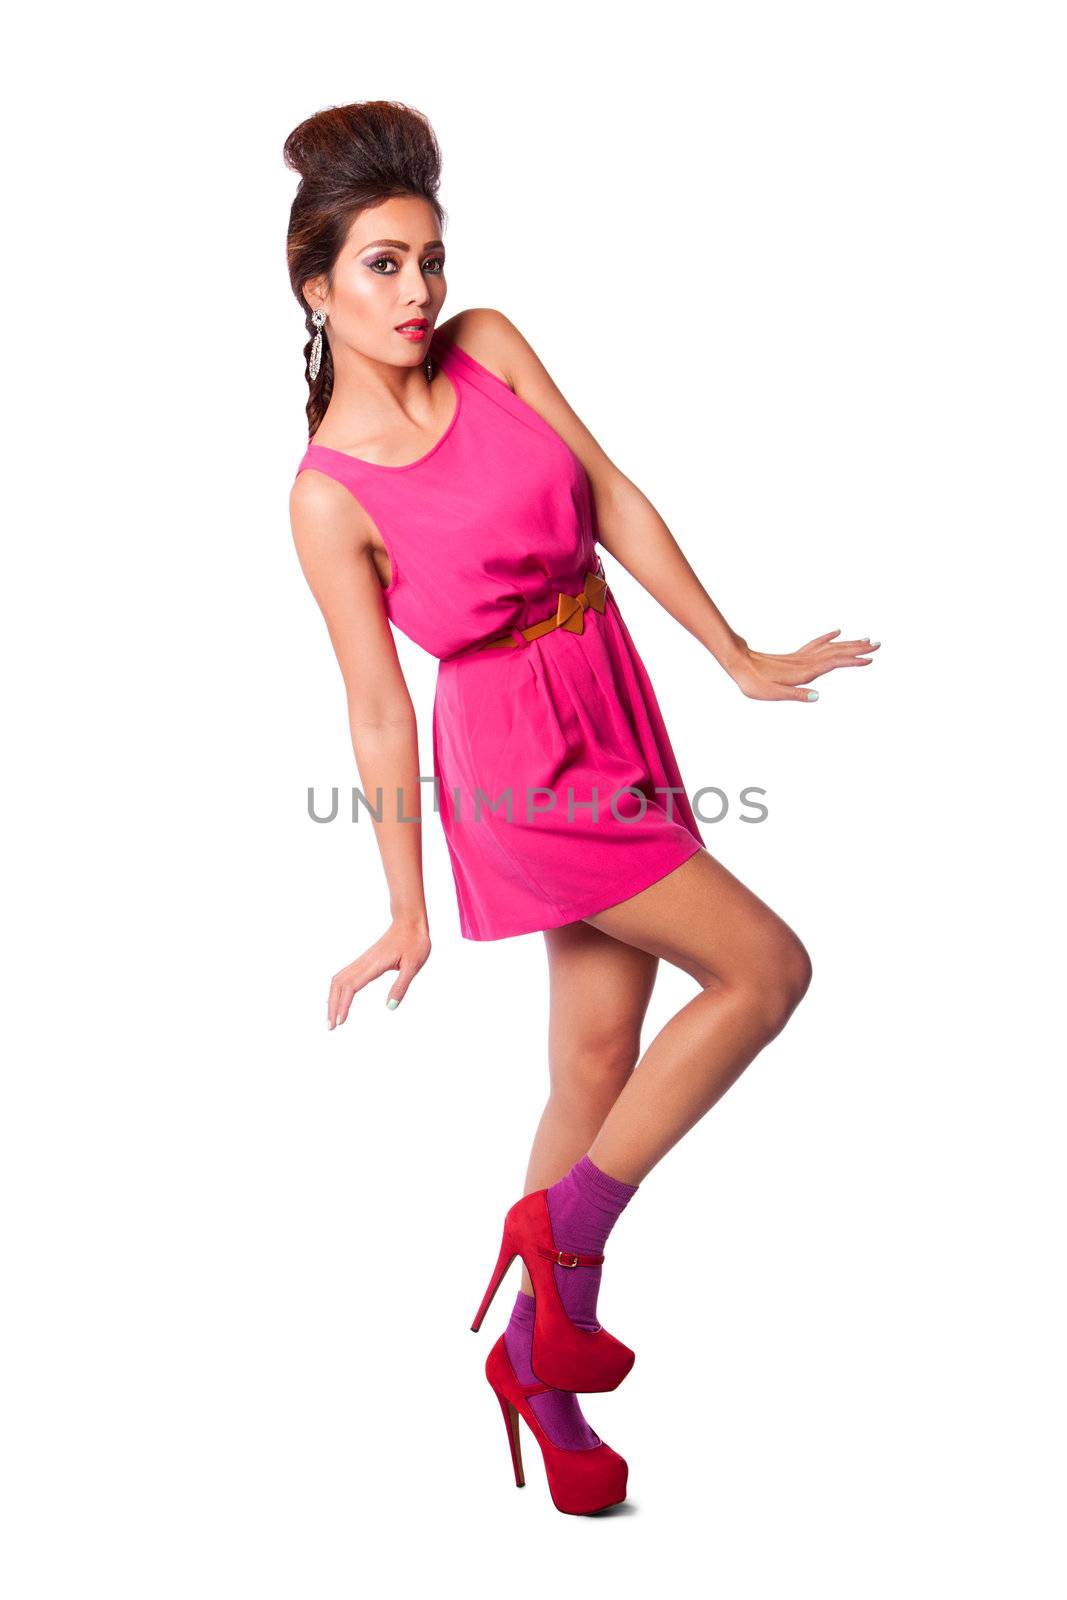 Beautiful attractive fashion woman in pink dress showing curves, long legs, and funky hairstyle.